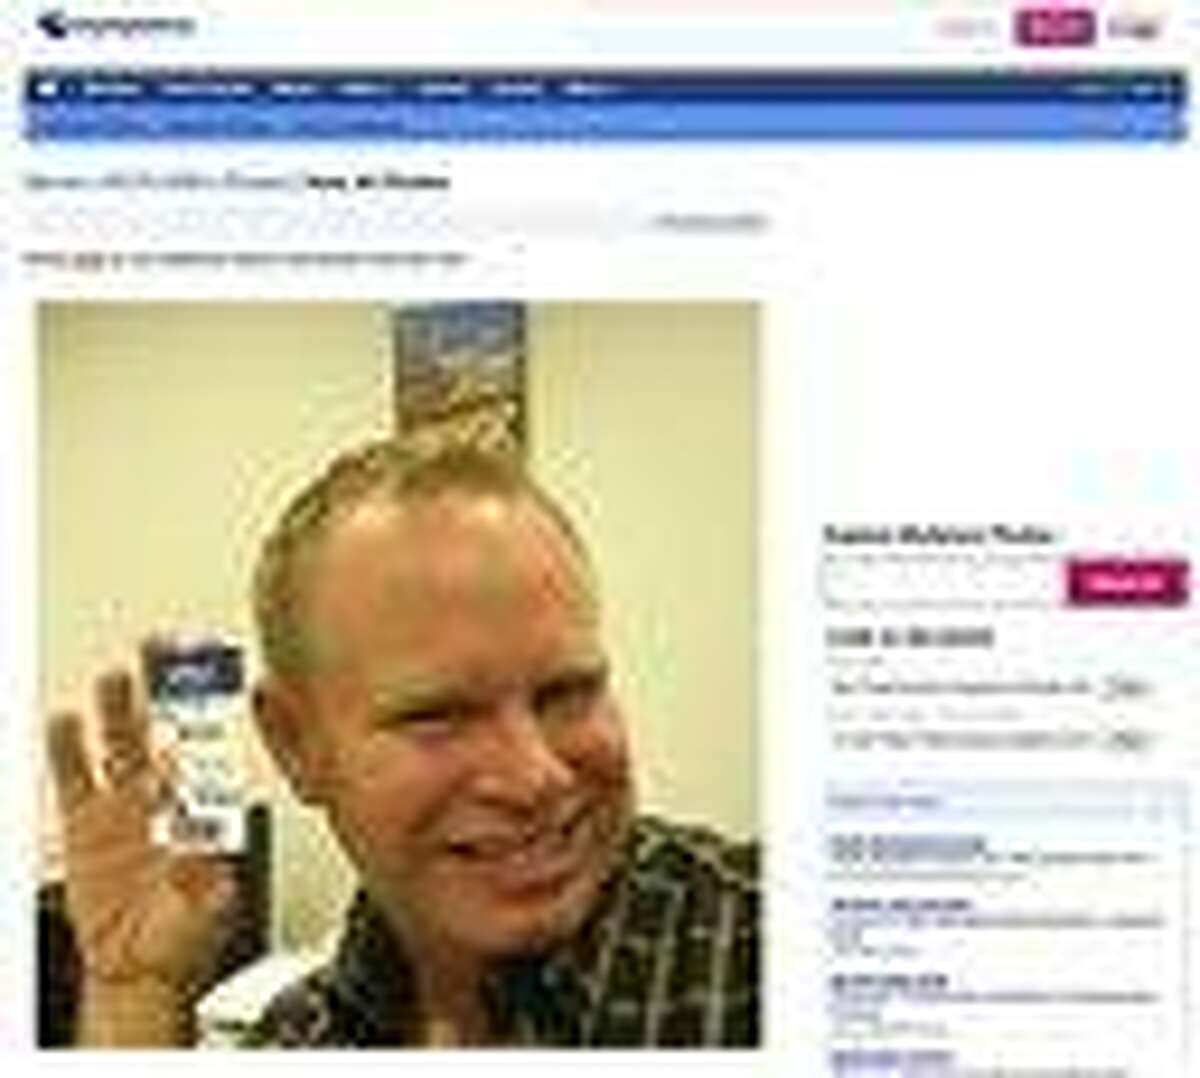 In this screen grab taken from MySpace shows Steven Slater. Slater, a flight attendant for JetBlue Airways Corp., looked pleased and relieved after cursing out a passenger on an airplane public-address system, grabbing some beer from the galley and using an emergency slide to hop off, another passenger said Tuesday, Aug. 10, 2010. Steven Slater lost his temper after a passenger accidentally hit him on the head with luggage on the ground at Kennedy Airport on Monday, police said. (AP Photo) NO SALES